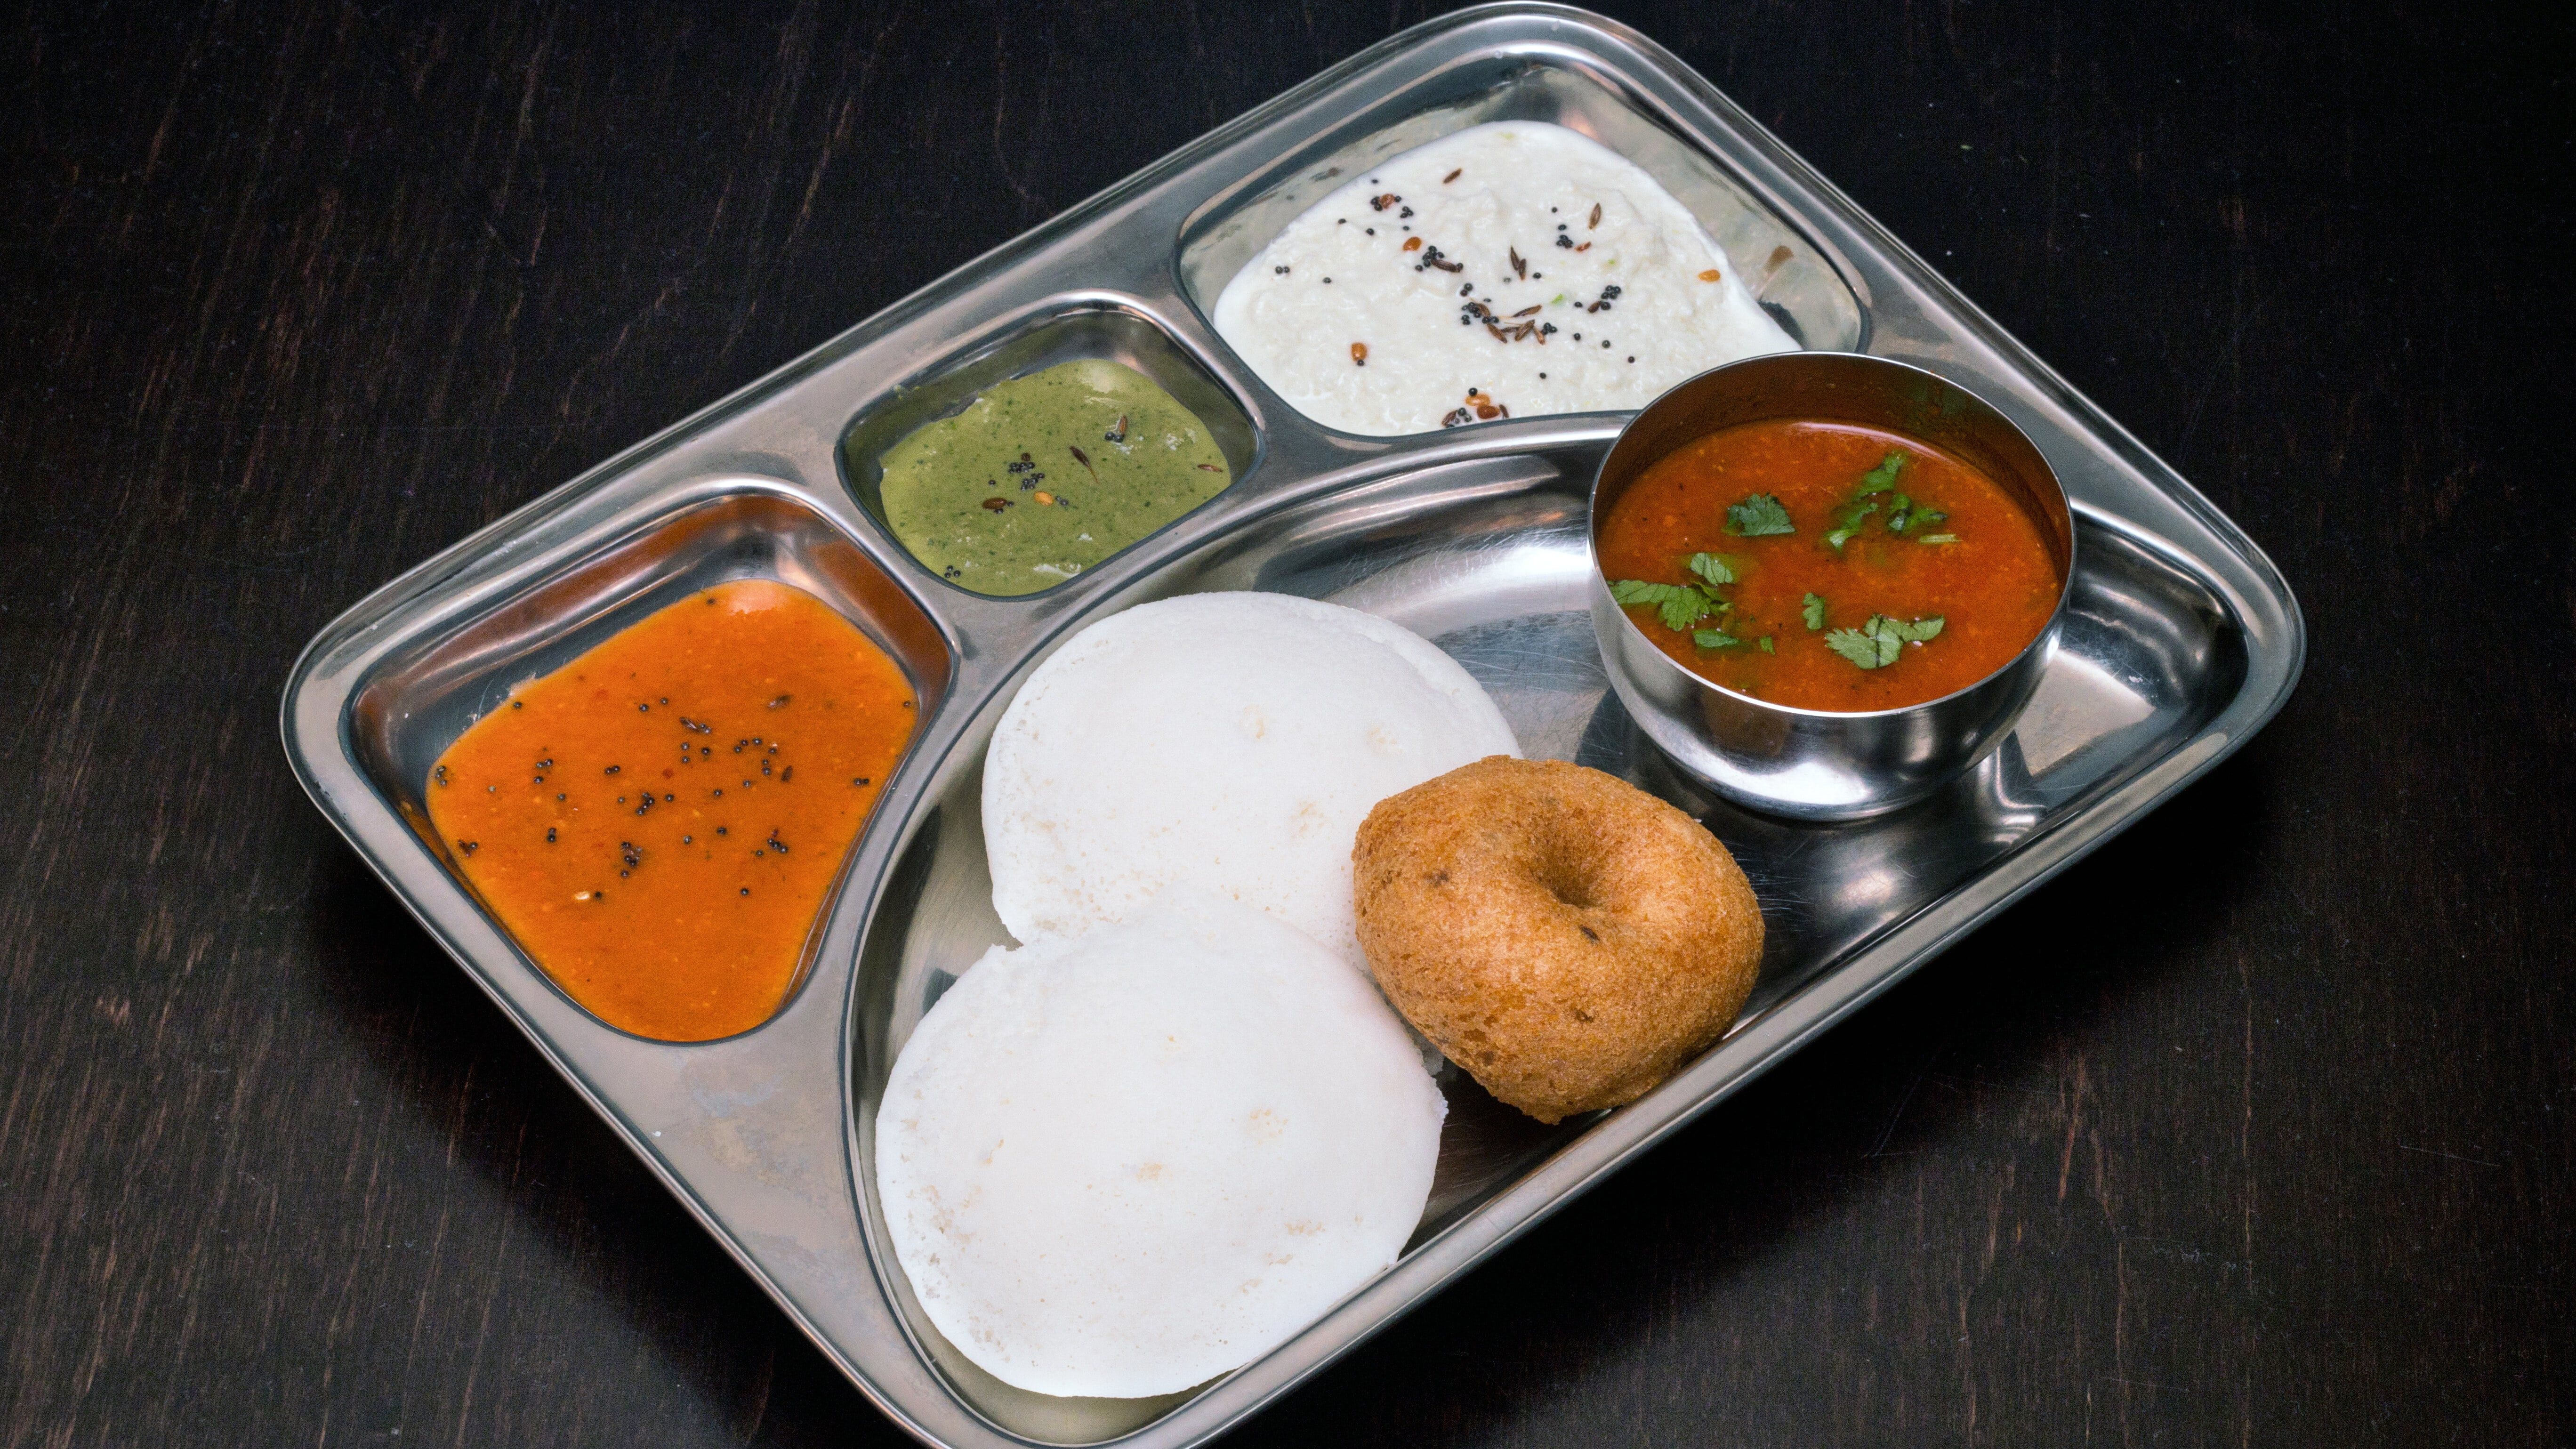 Idli vada is traditional south Indian any day healthy meal/starter served with Indian home made sauces - Krishna Vilas Utrecht, Utrecht